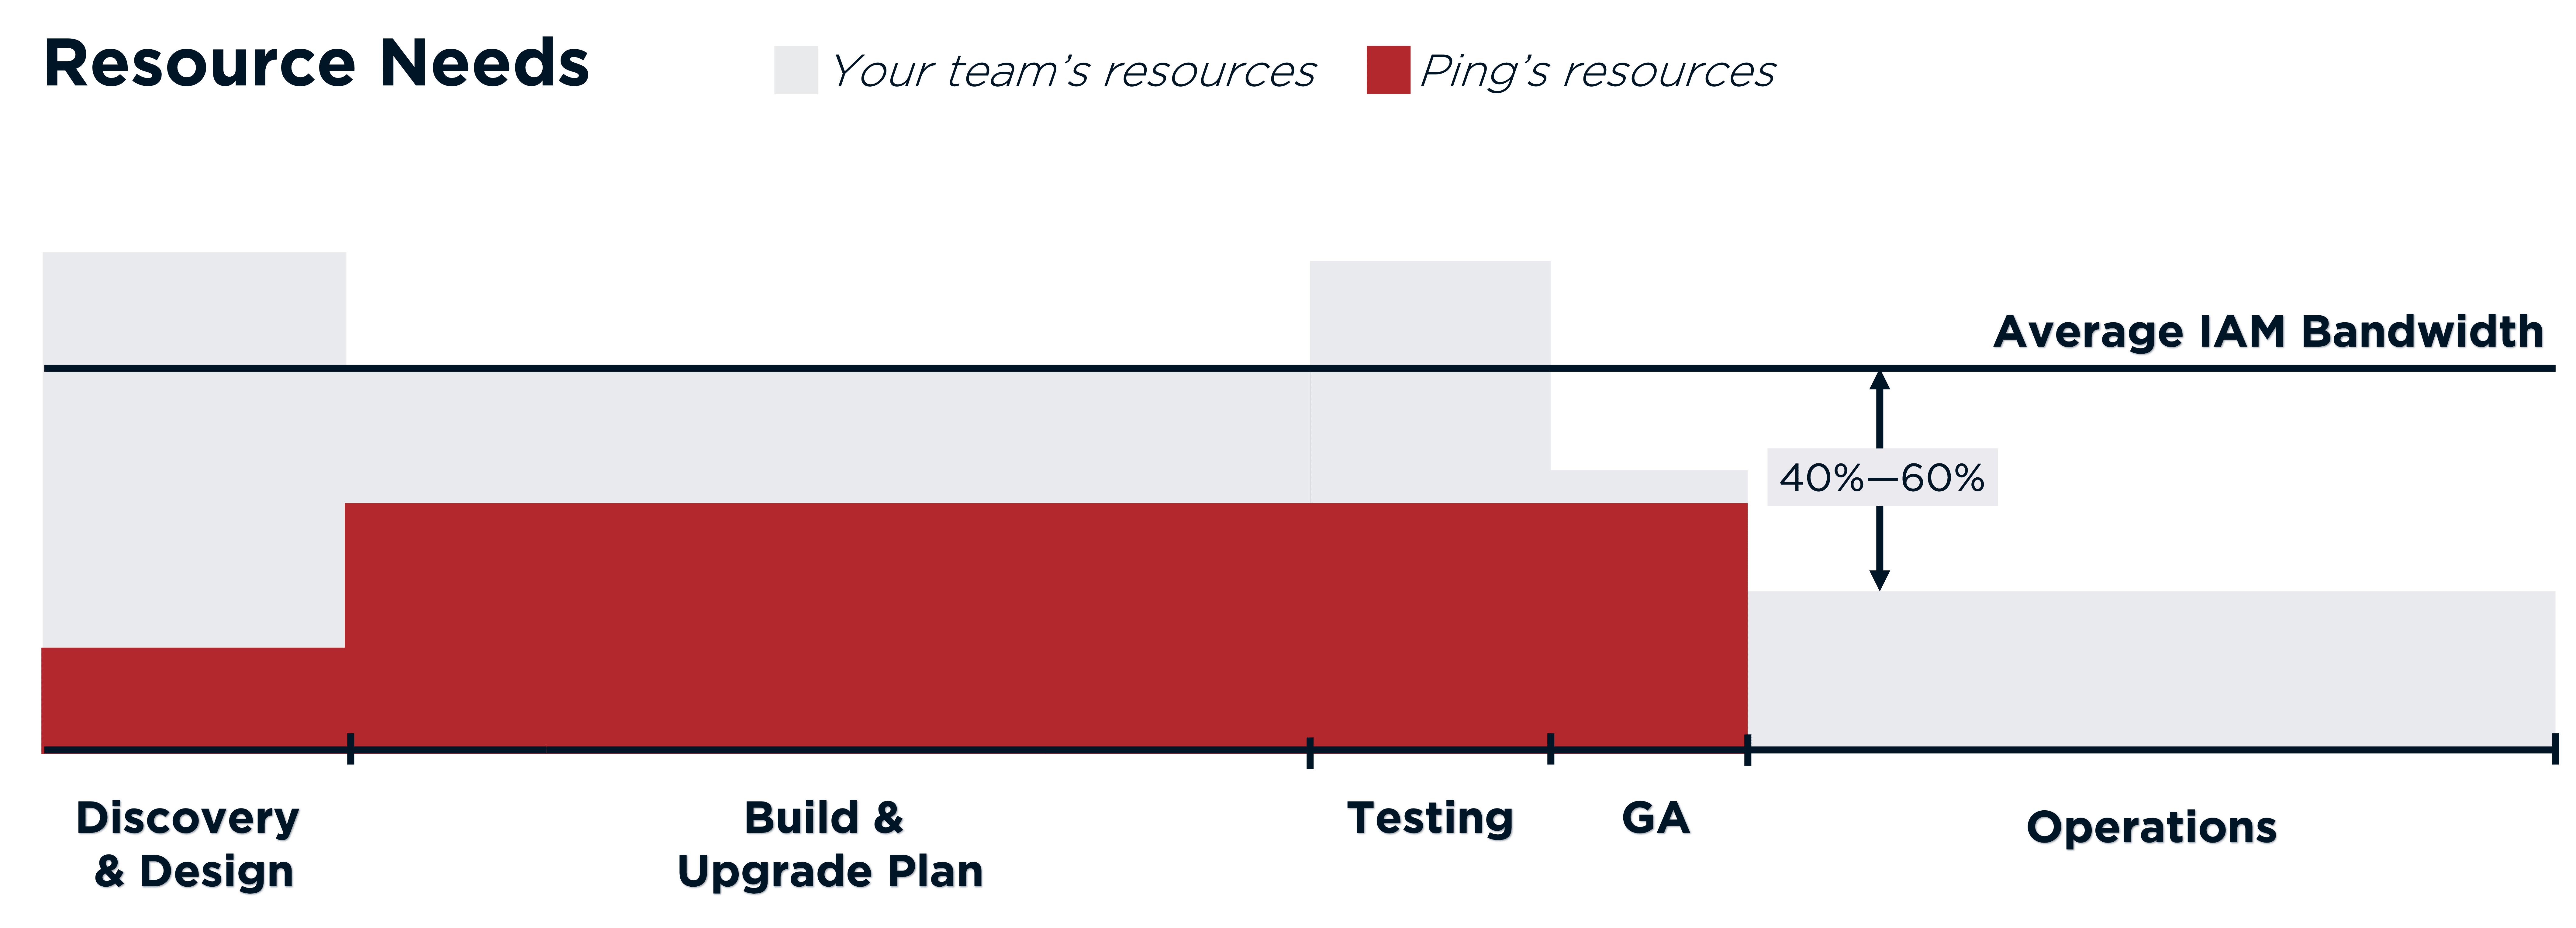 A bar chart illustrating the split of staffing resources in each phase of a typical cloud upgrade project